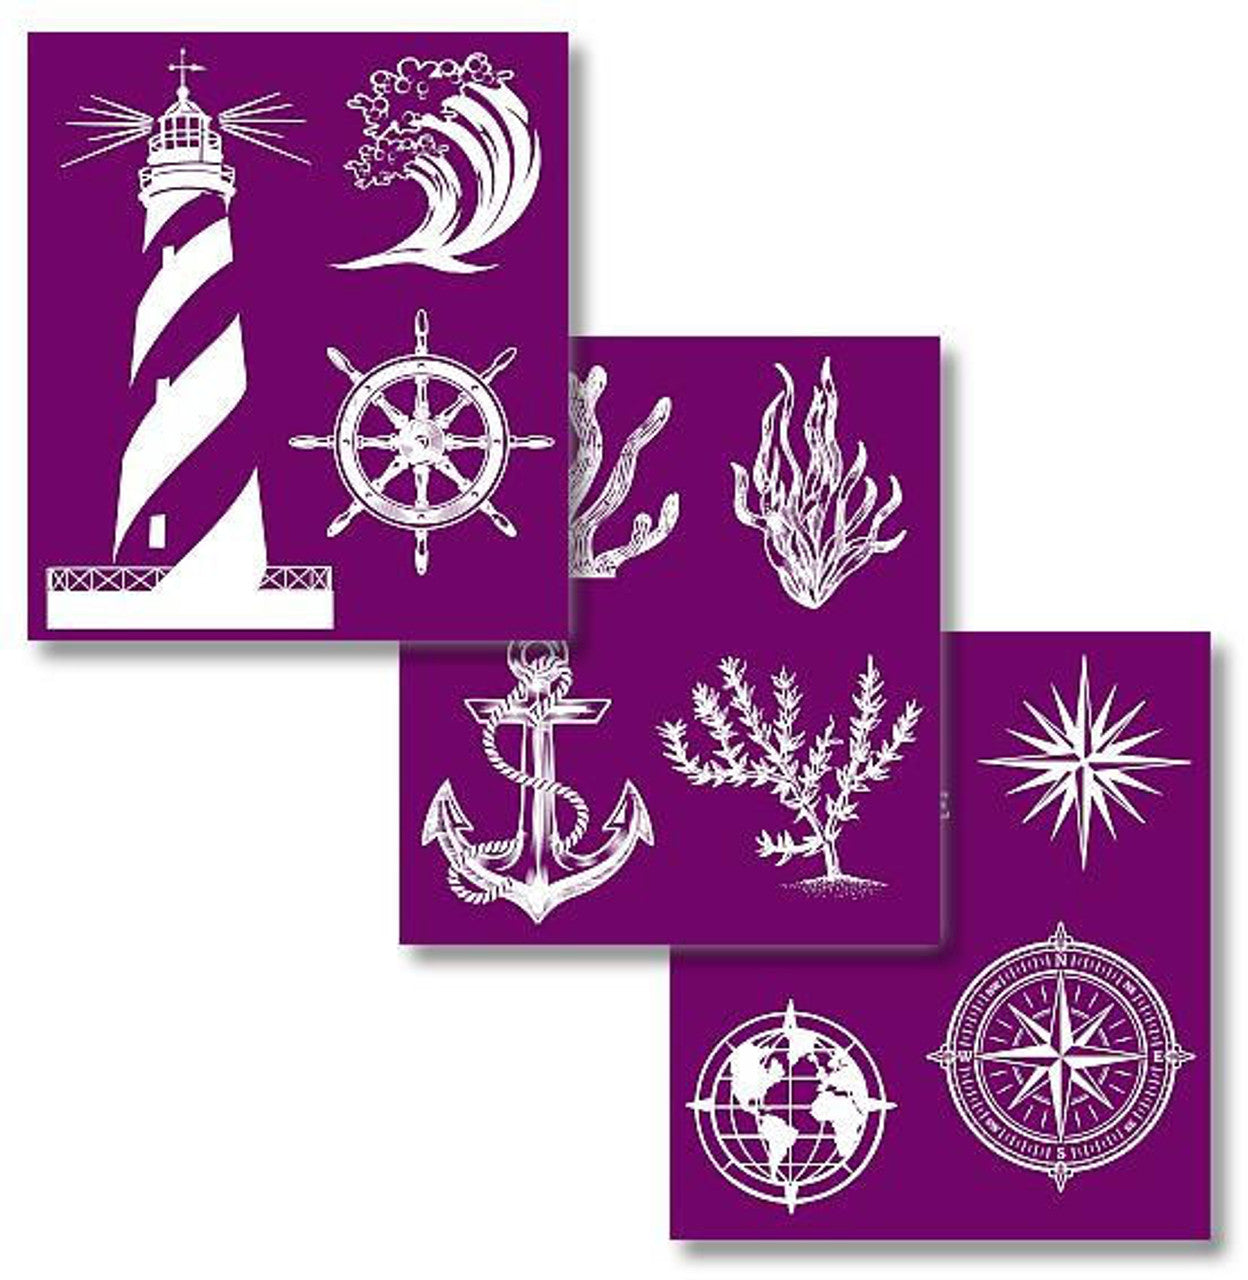 NAUTICAL Silk Screen Stencils 3 designs 8" x 10" by Belles and Whistles